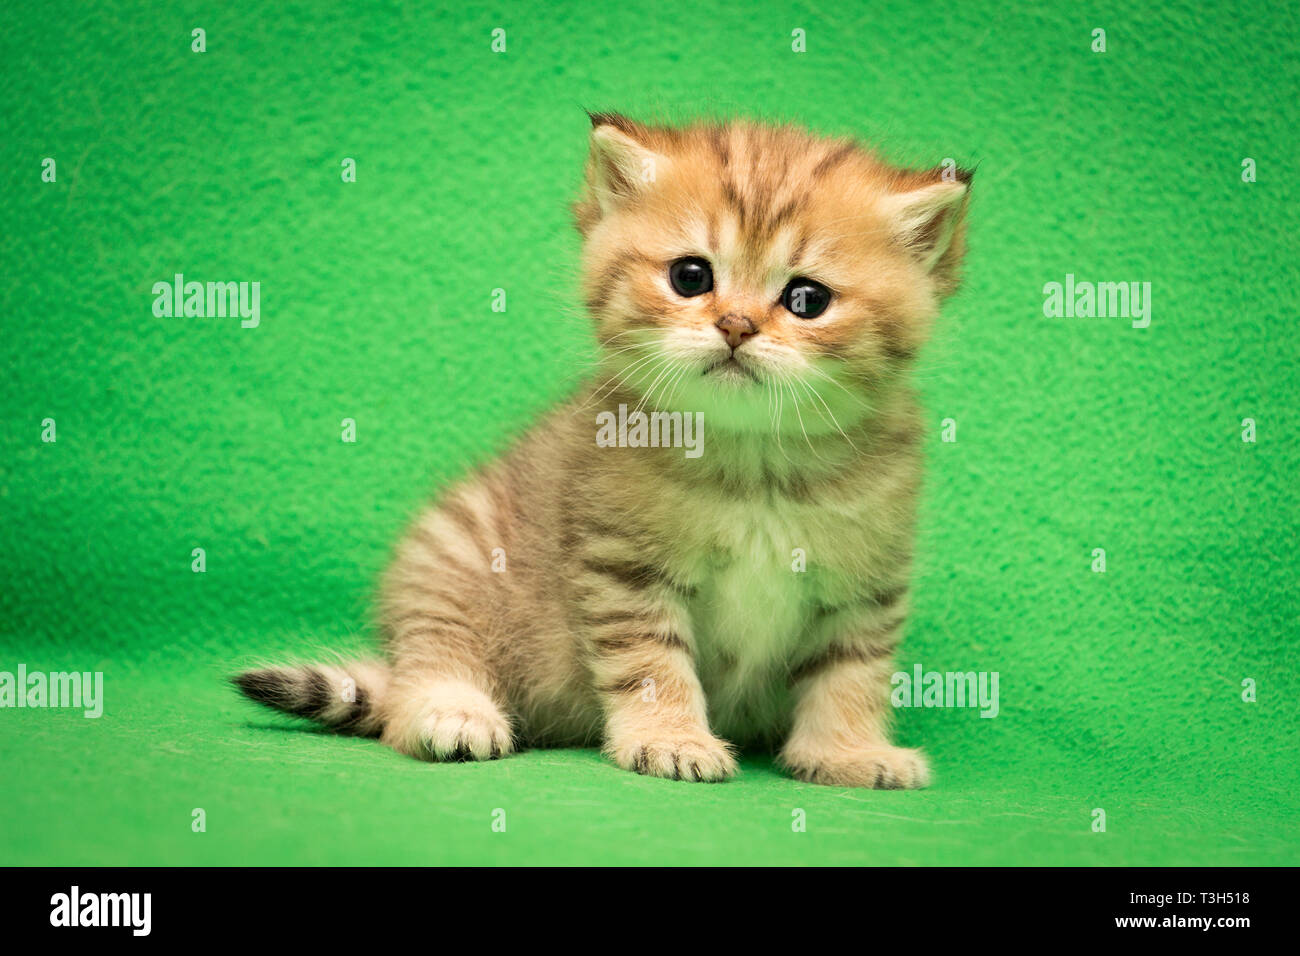 Little British cat Golden tabby color sitting on a green background Stock Photo